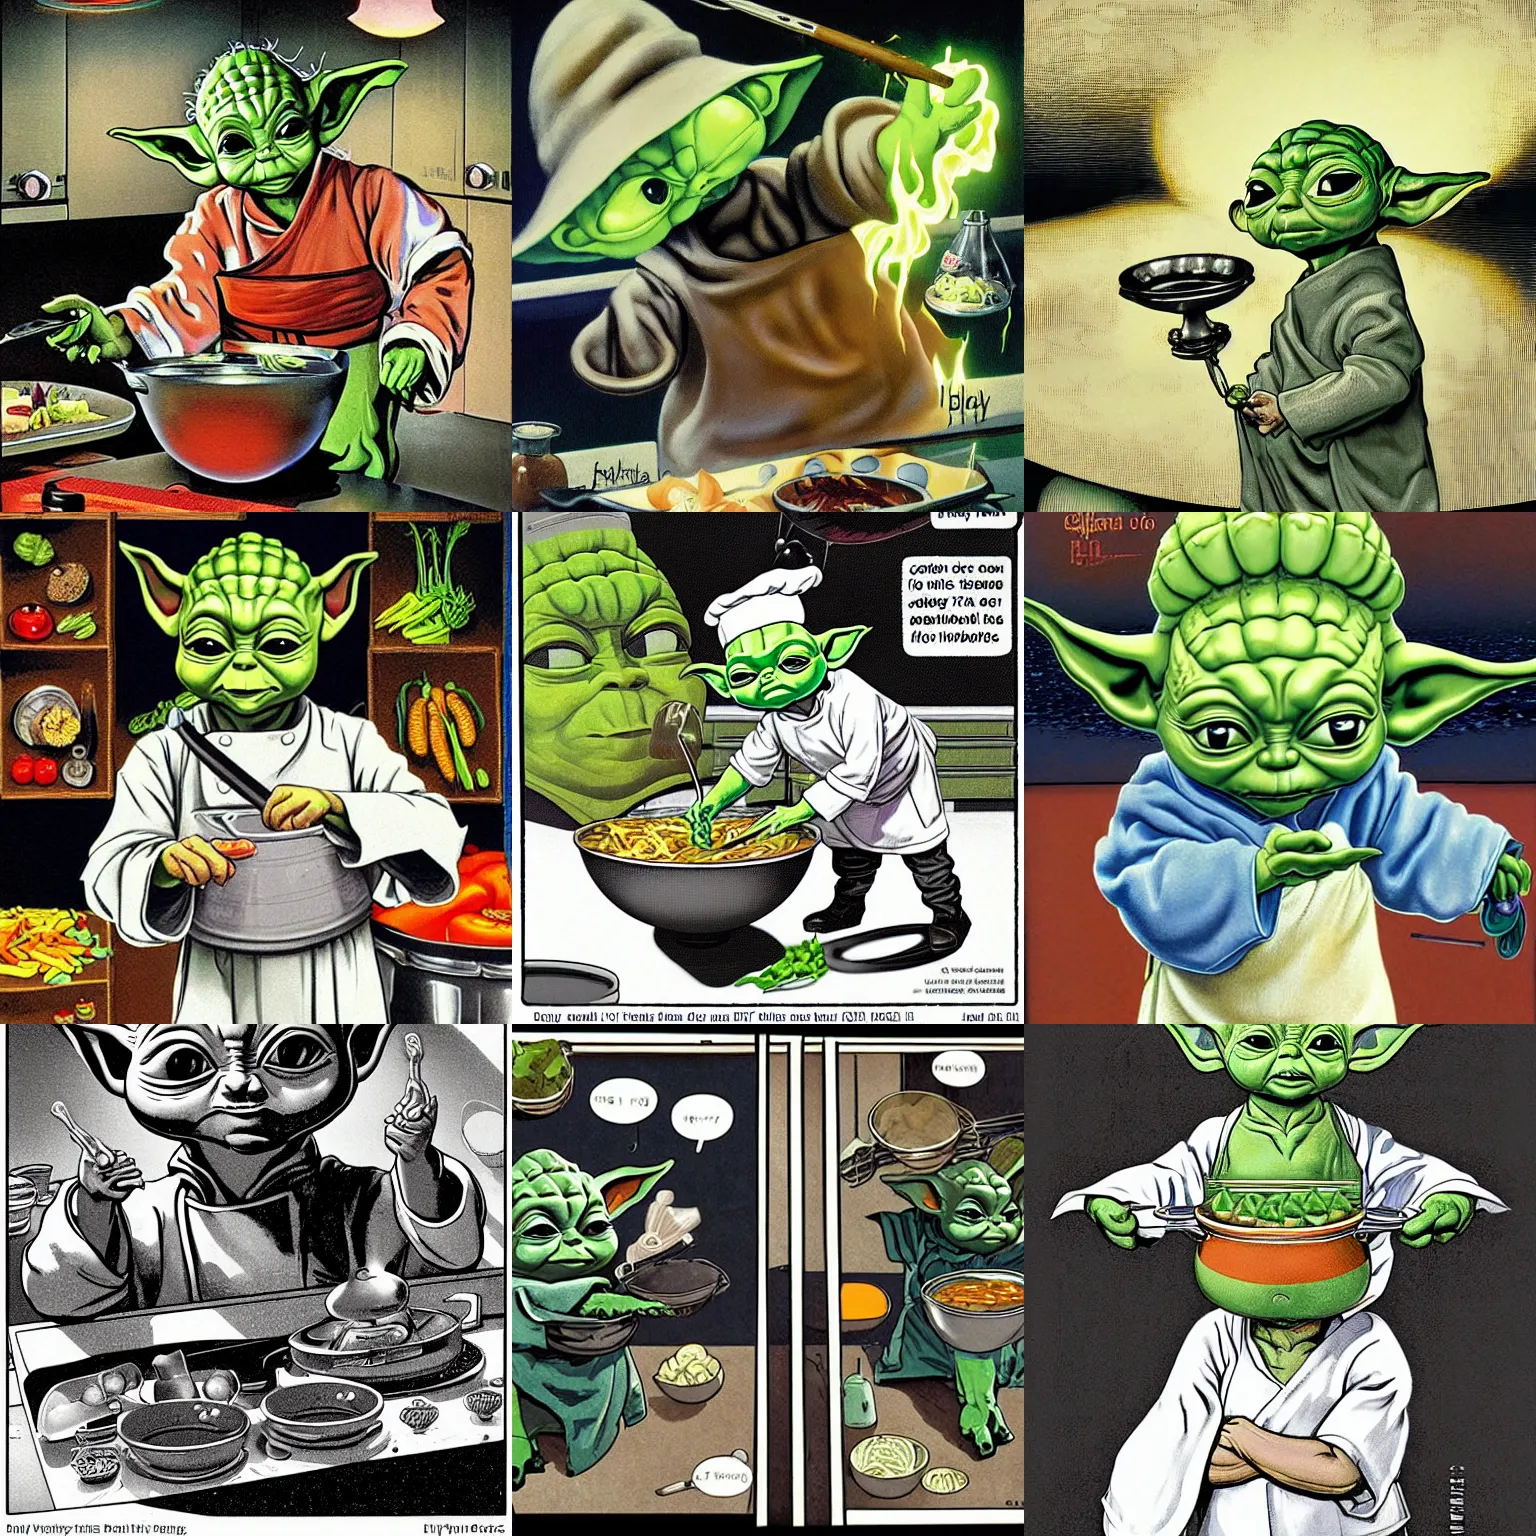 Prompt: tiny baby yoda cooking vegetables as a chef wearing a white chefs hat and apron and gently holding a bowl in both hands by ed emshwiller and alejandro burdisio and david mattingly and christopher balaskas and john harris and virgil finlay and dean ellis and jack gaughan, hyperrealistic, high detail, cooking, vegetables, chef